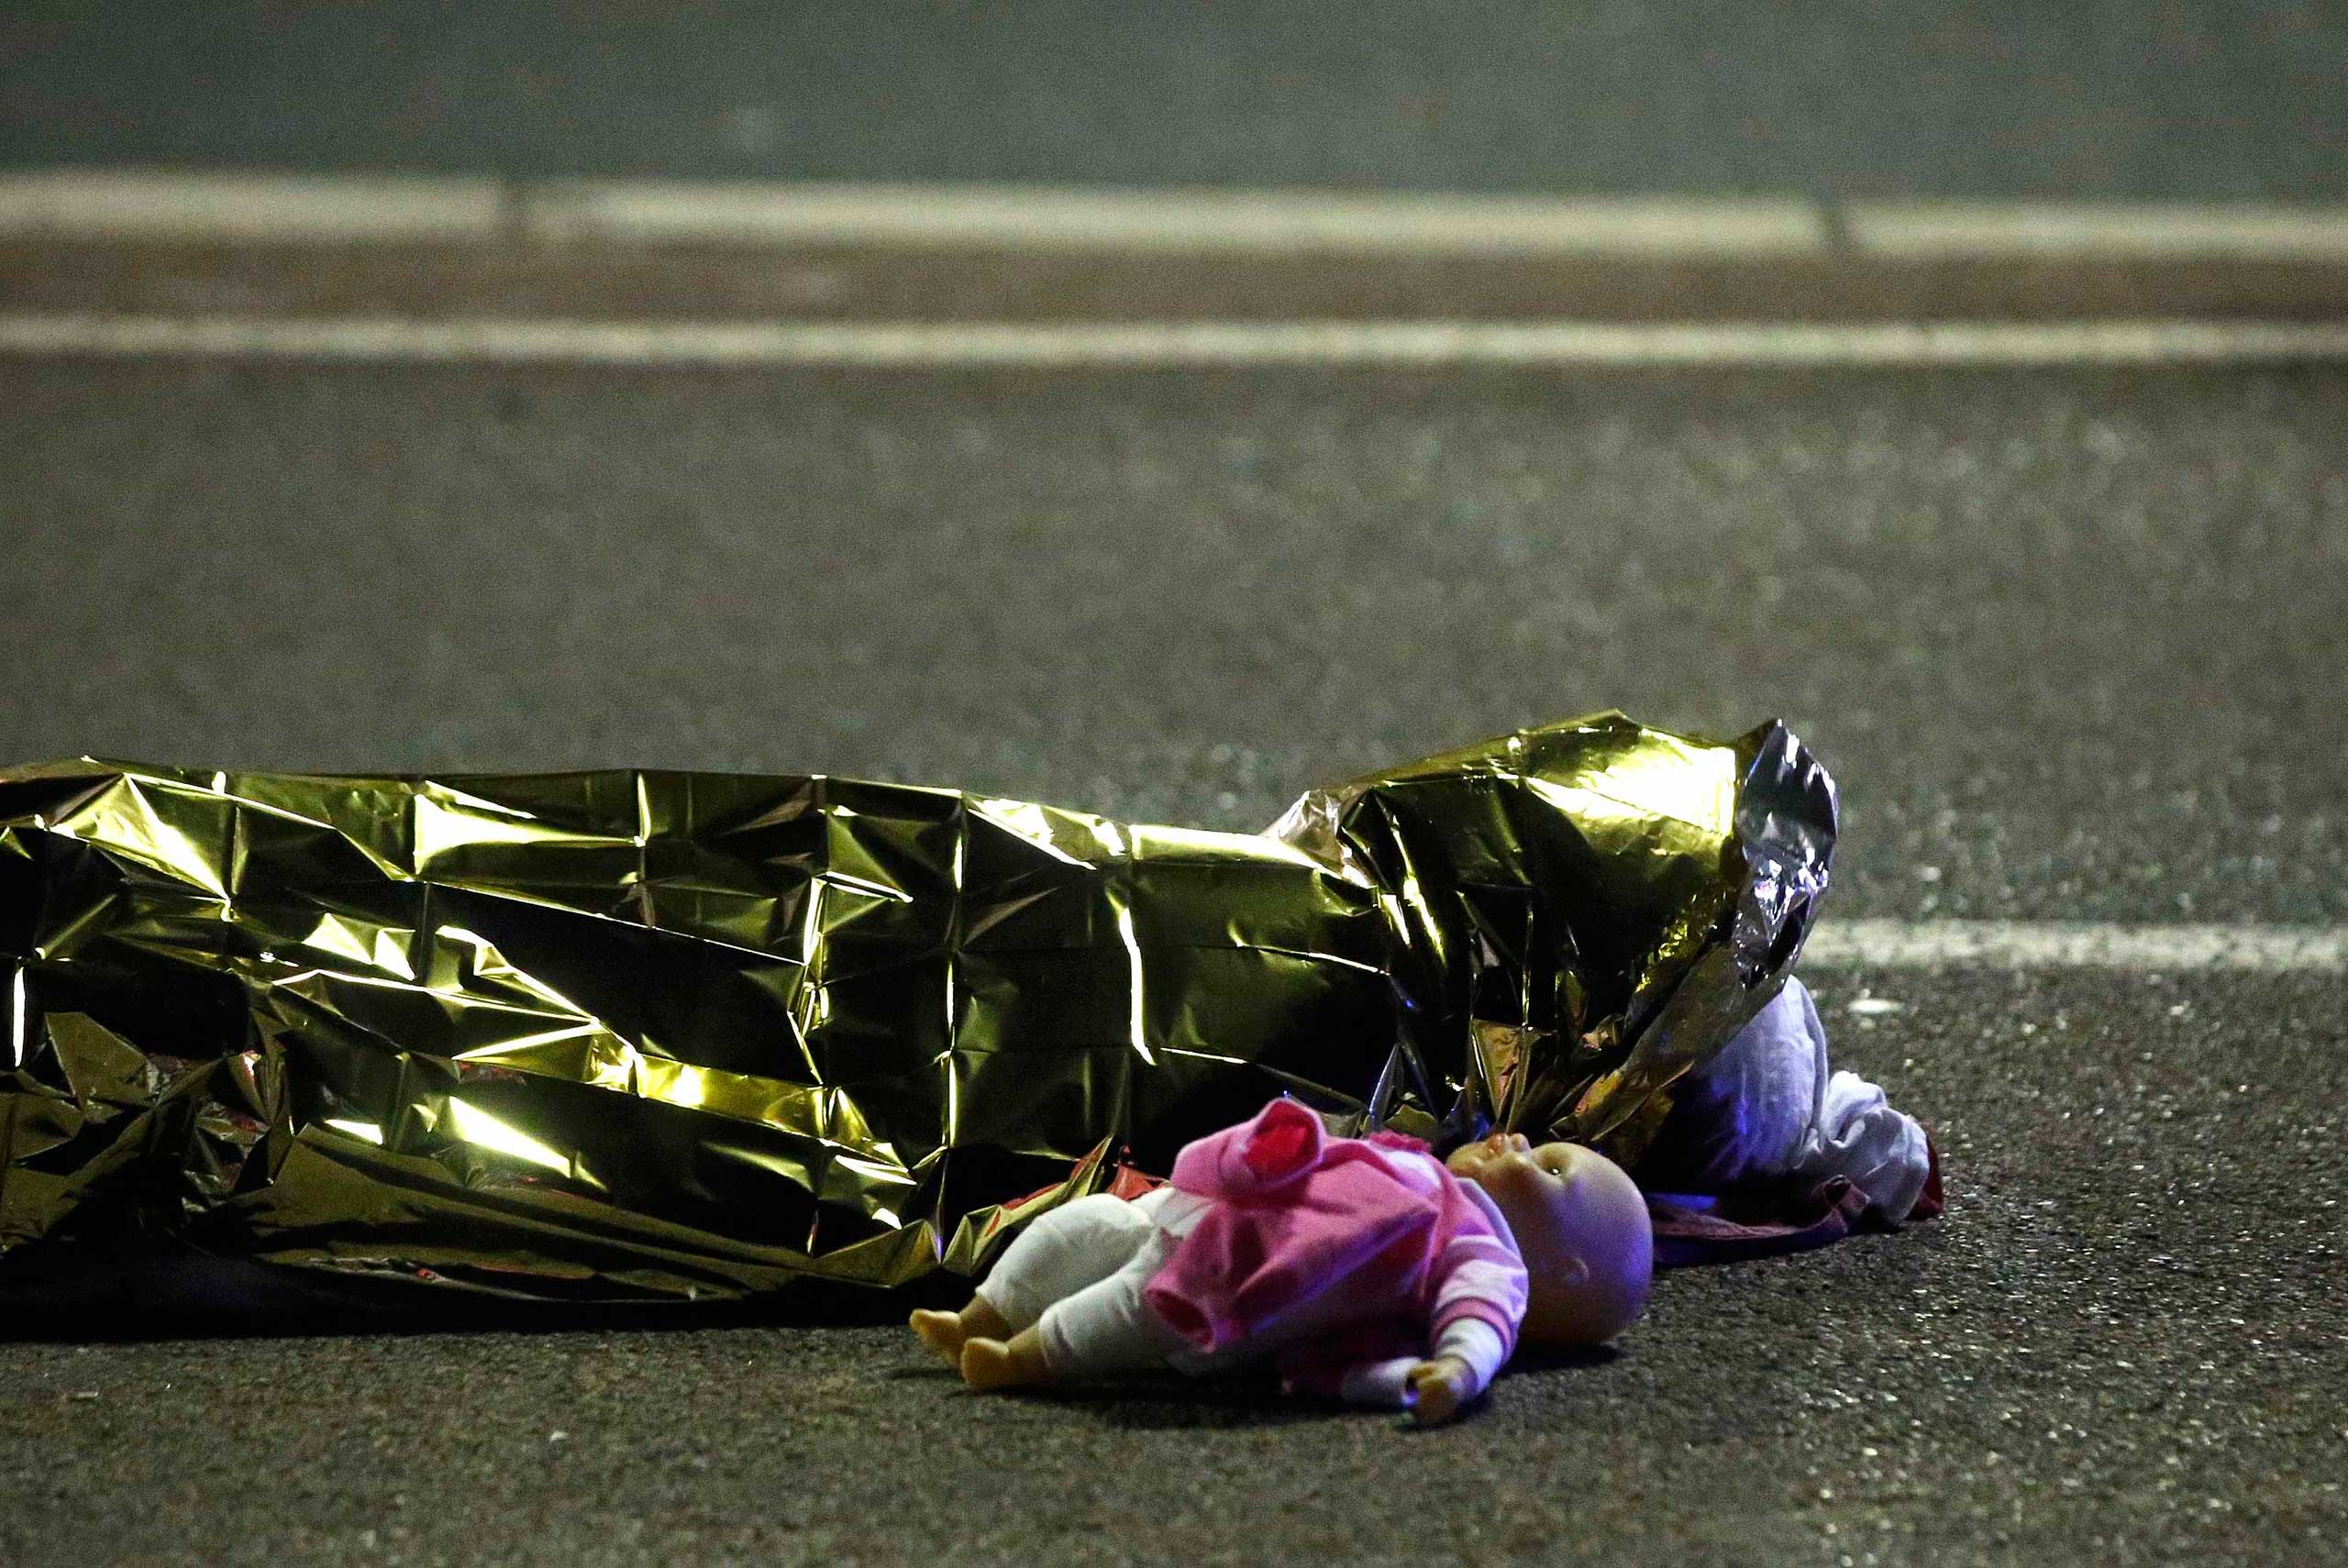 A body is seen on the ground July 15, 2016  after at least 84 people were killed in Nice, France, when a truck ran into a crowd celebrating the Bastille Day national holiday. (Eric Gaillard—Reuters)